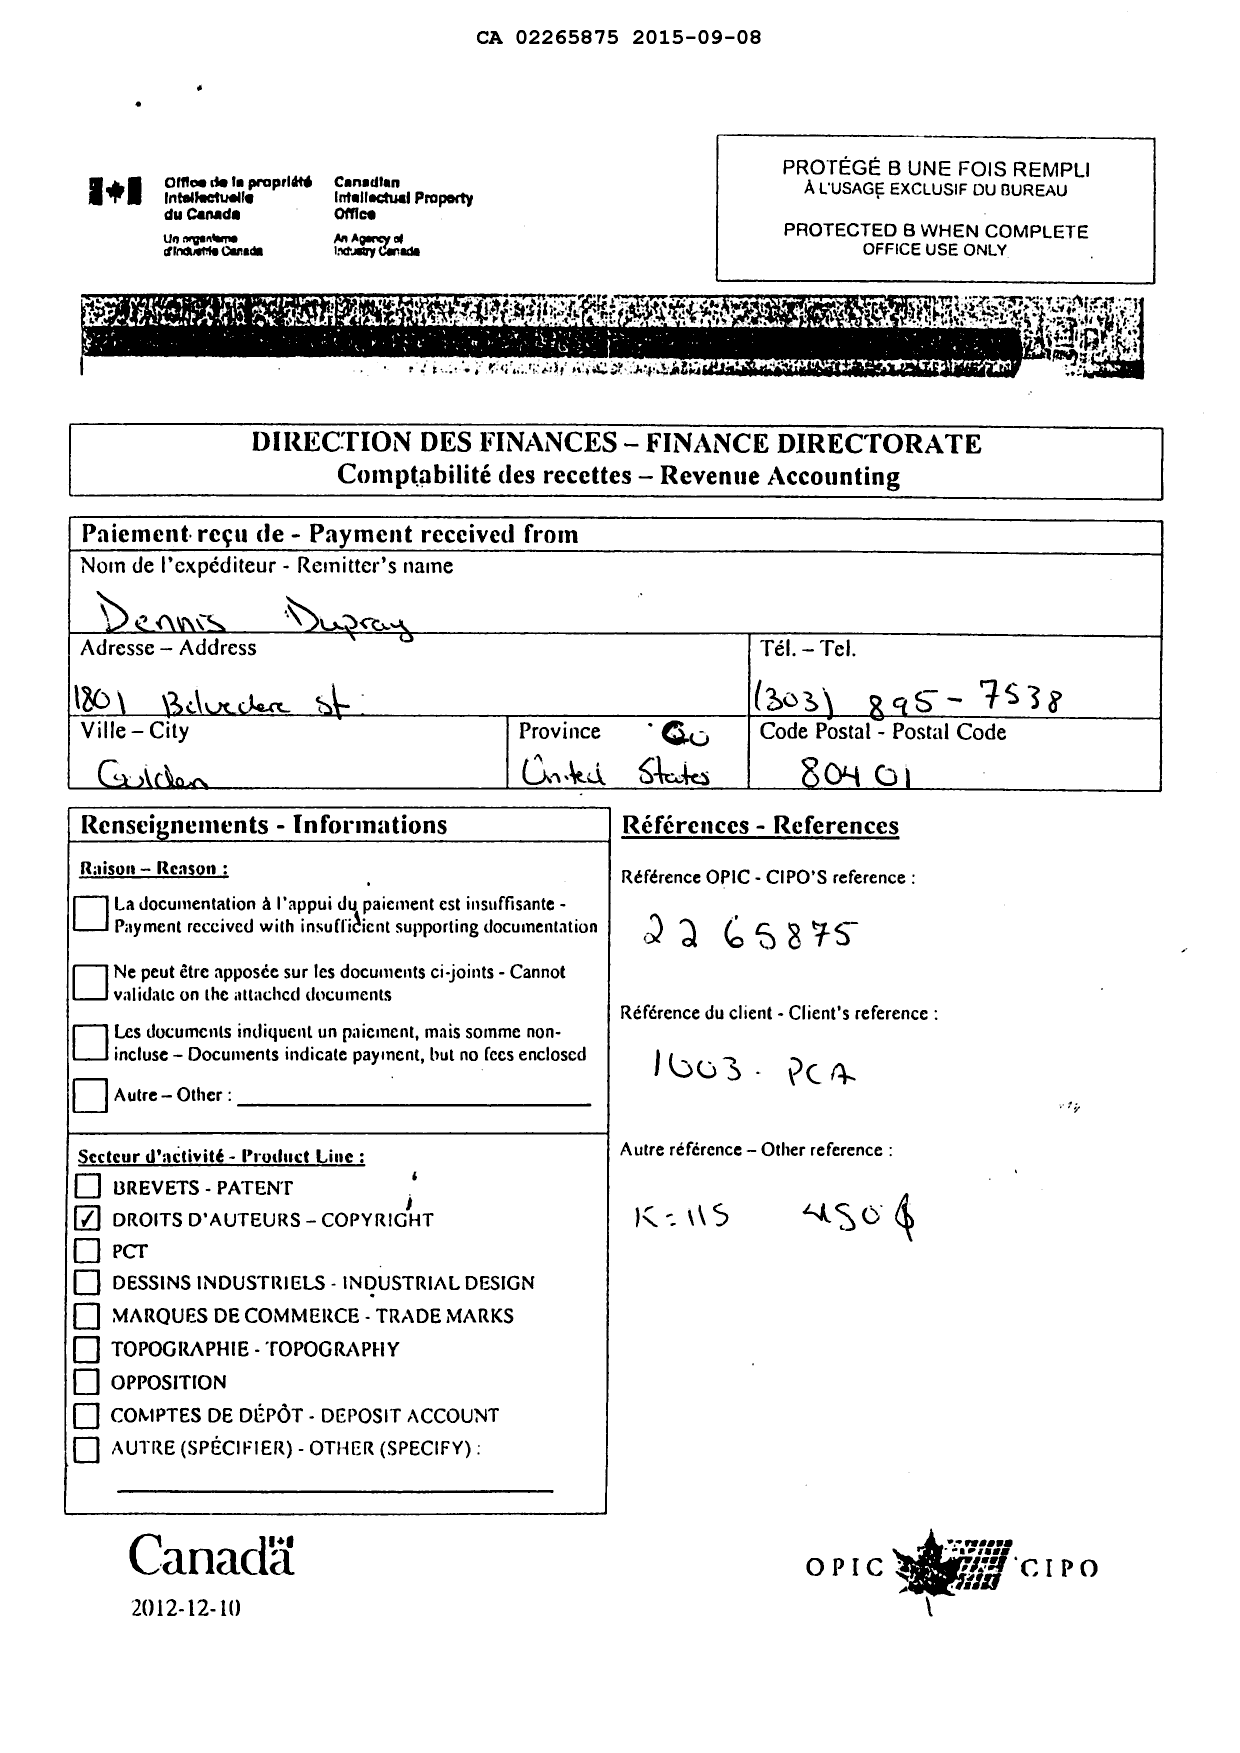 Canadian Patent Document 2265875. Maintenance Fee Payment 20150908. Image 2 of 2